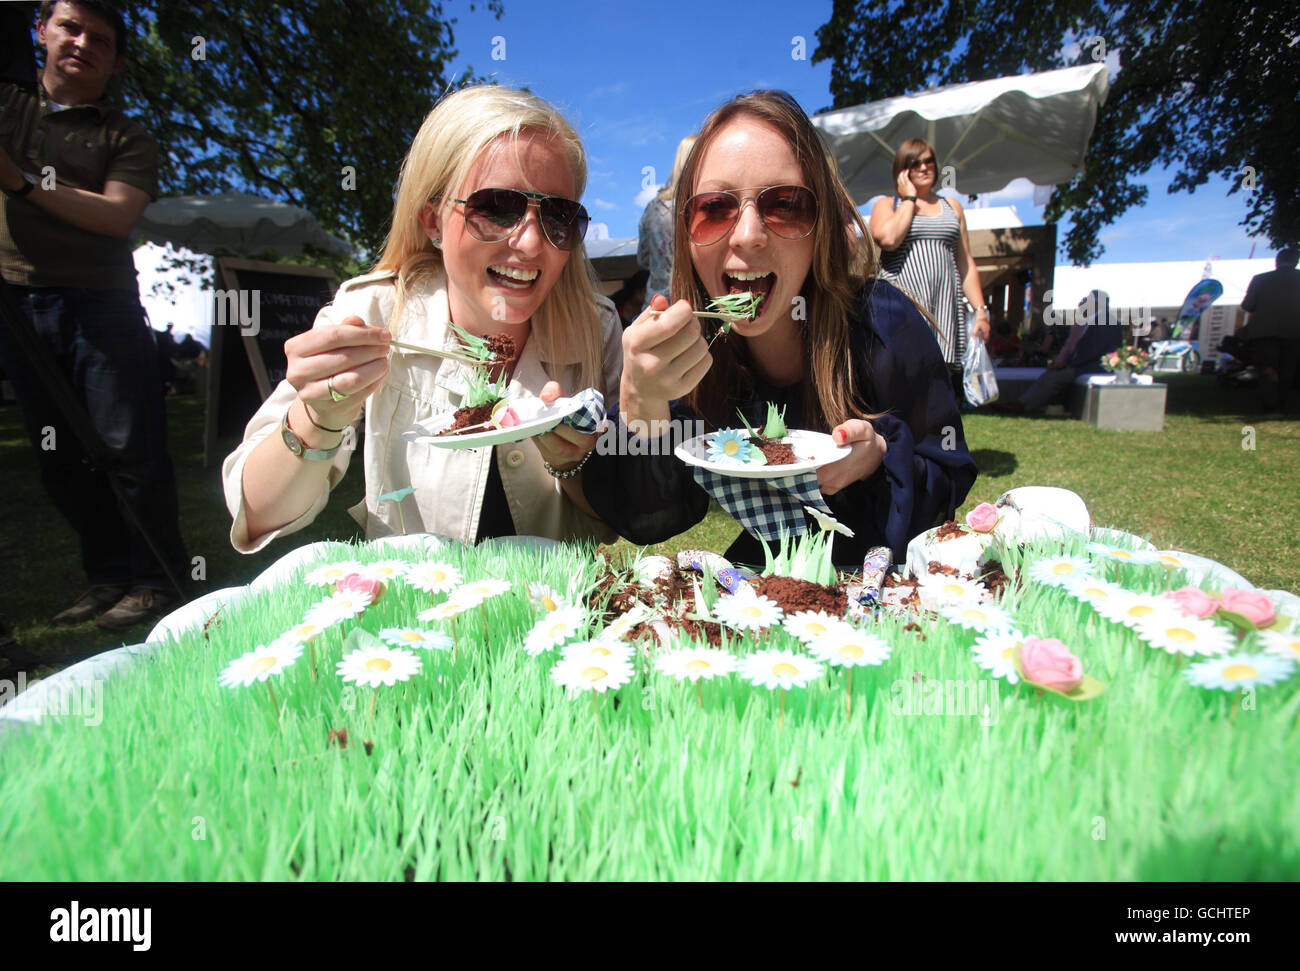 Rose Pennington (left) and Jessica Law sample some edible grass during the Taste of London food festival, in Regents Park, central London. Stock Photo